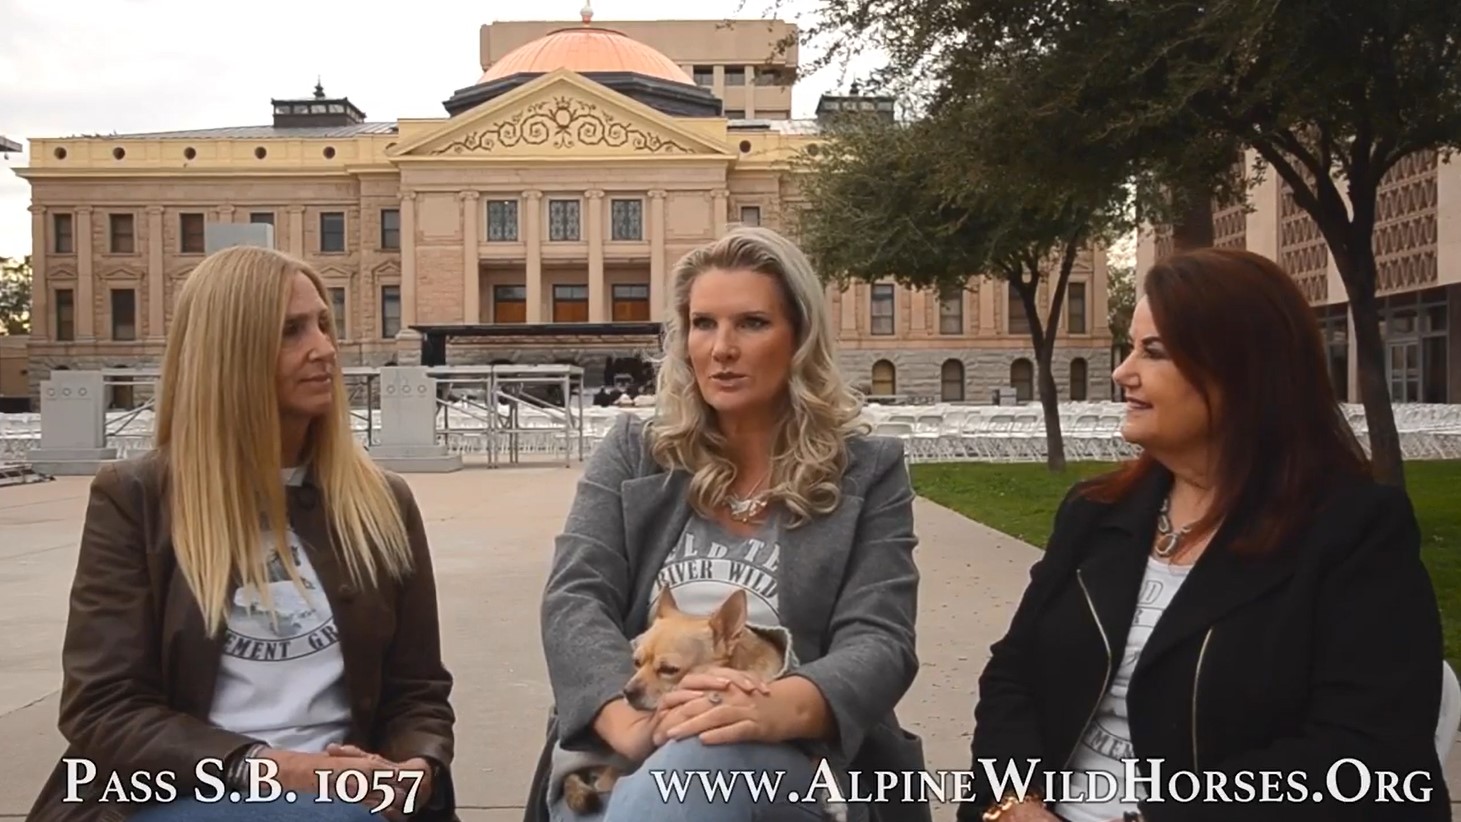 [Video] Support S.B. 1057! Prohibits killing, shooting and slaughtering any horse in the Alpine herd.